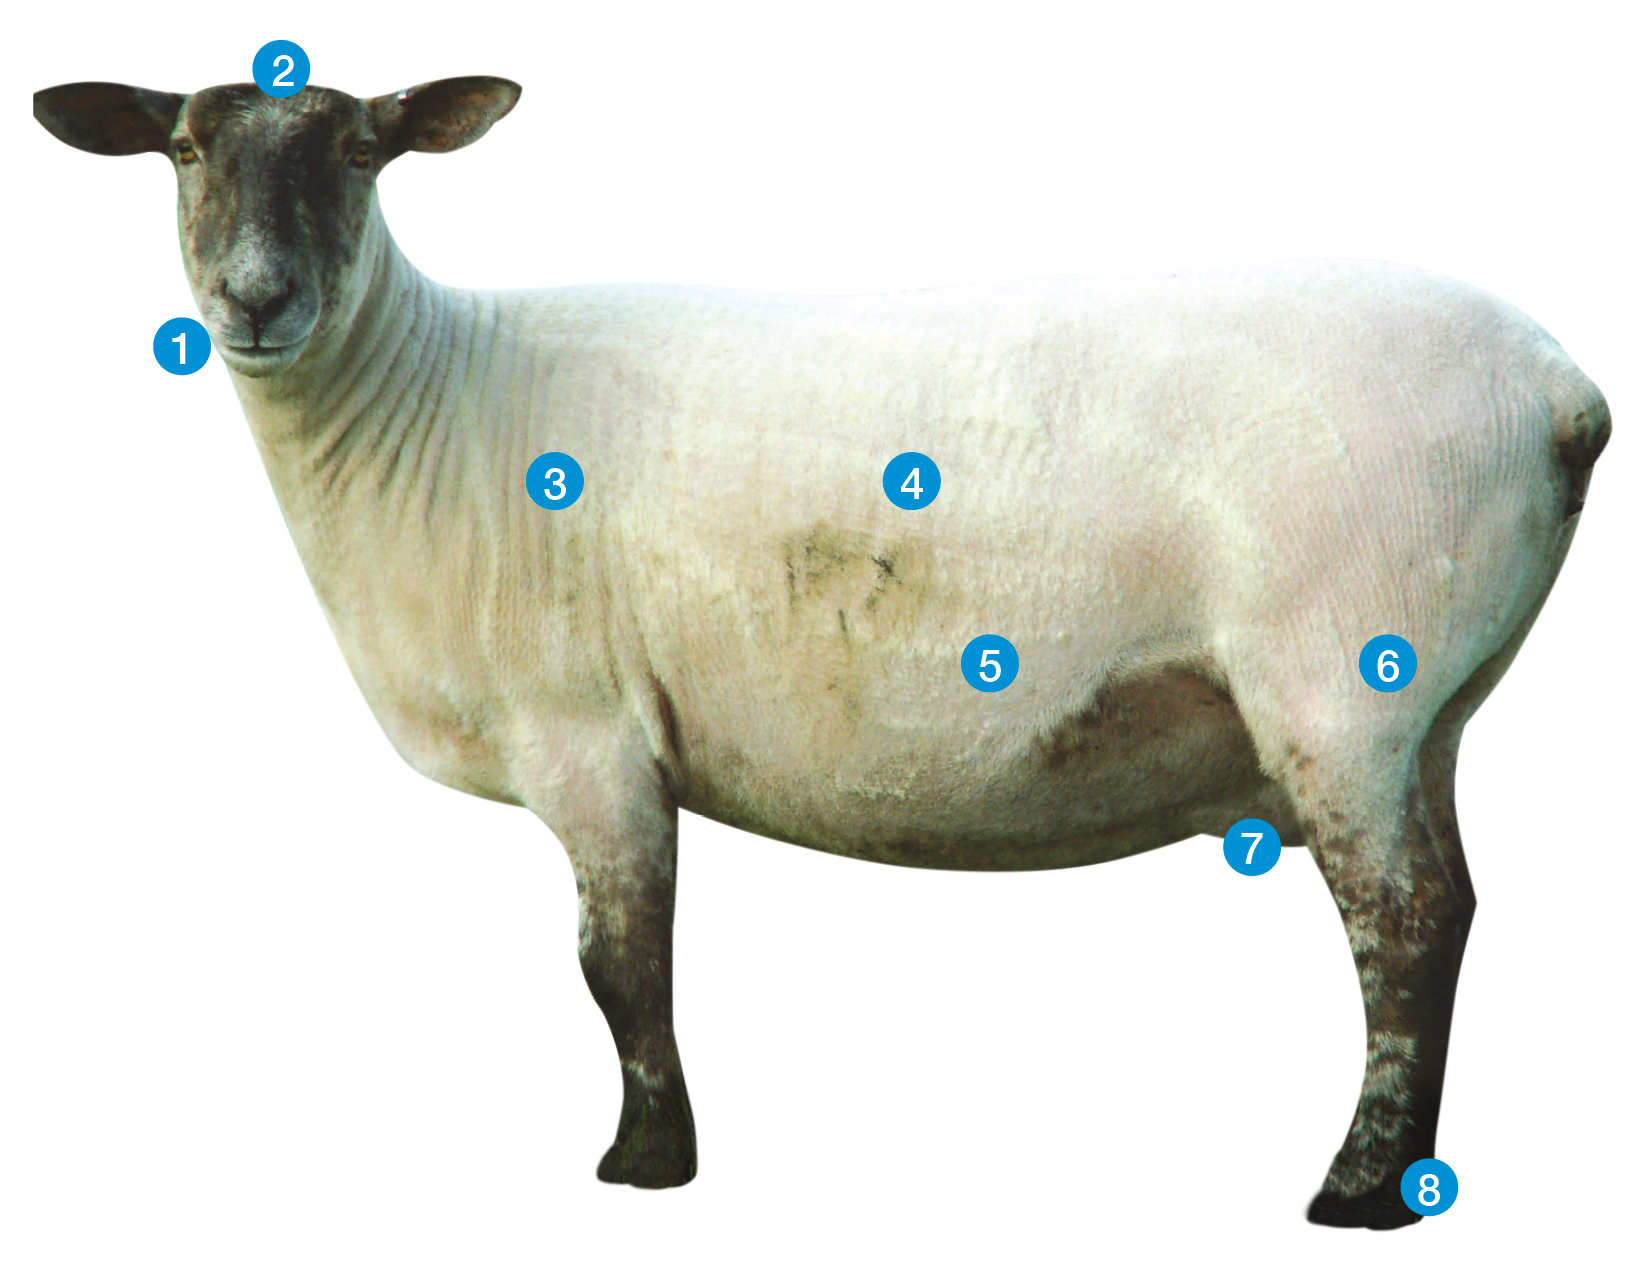 A breeding ewe with numbers from 1 to 8 on to show what to look for when stock judging. 1 - Mouth, 2 - The head, 3 - Shoulders, 4 - The body, 5 - wool, 6 - Legs, 7 - Udder and 8 - Feet.